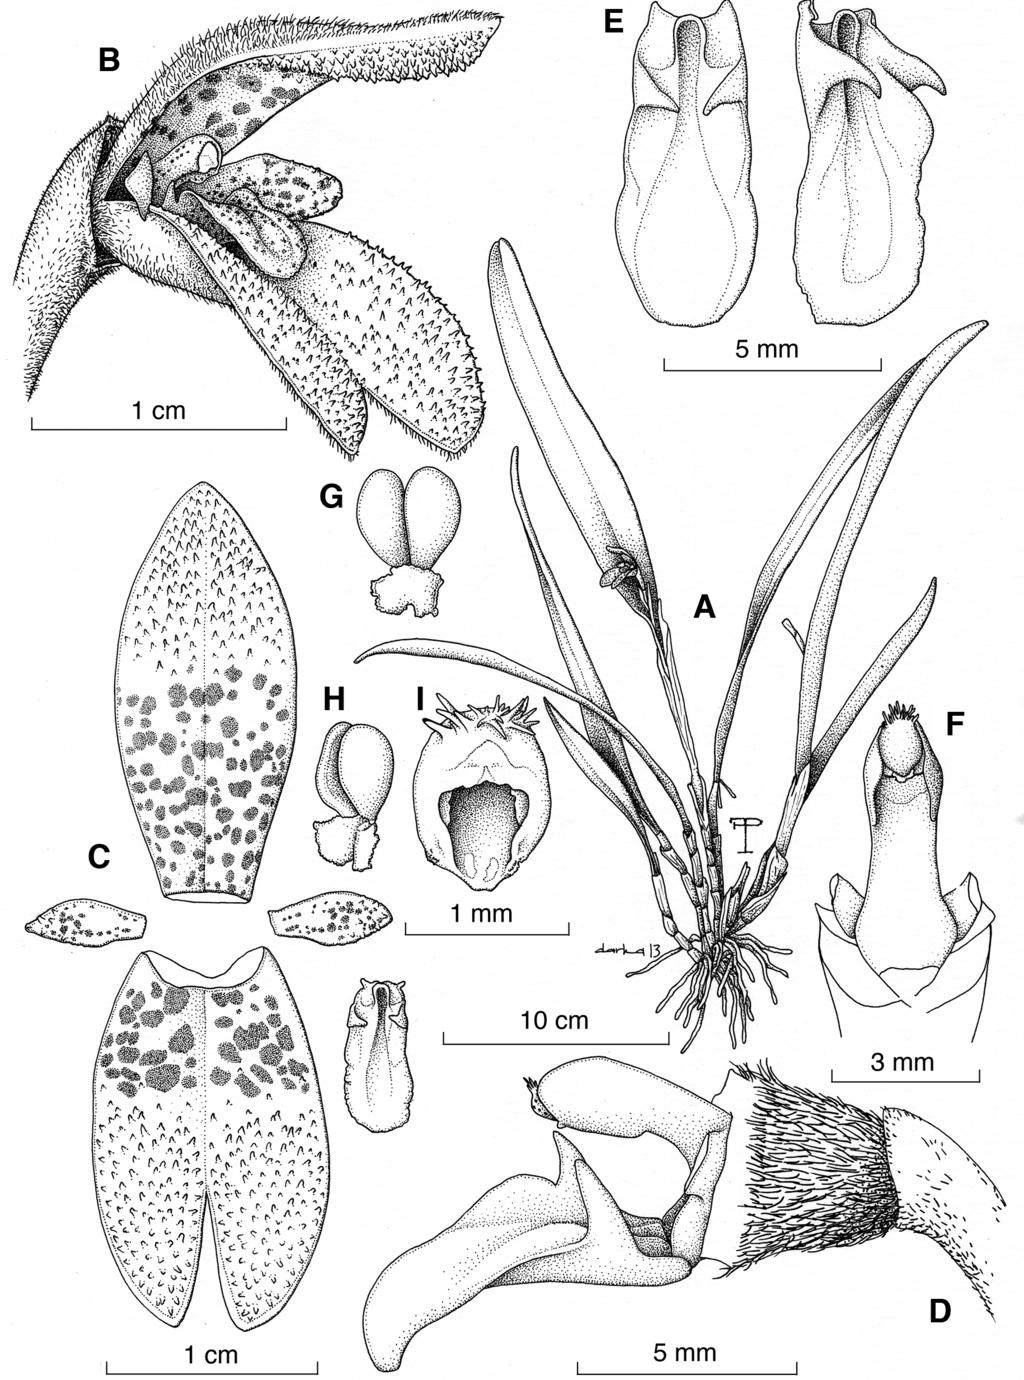 296 LANKESTERIANA Figure 9. Echinosepala expolita Pupulin & Belfort. A. habit. B, flower. C, dissected perianth. D, ovary, column and lip in lateral view.